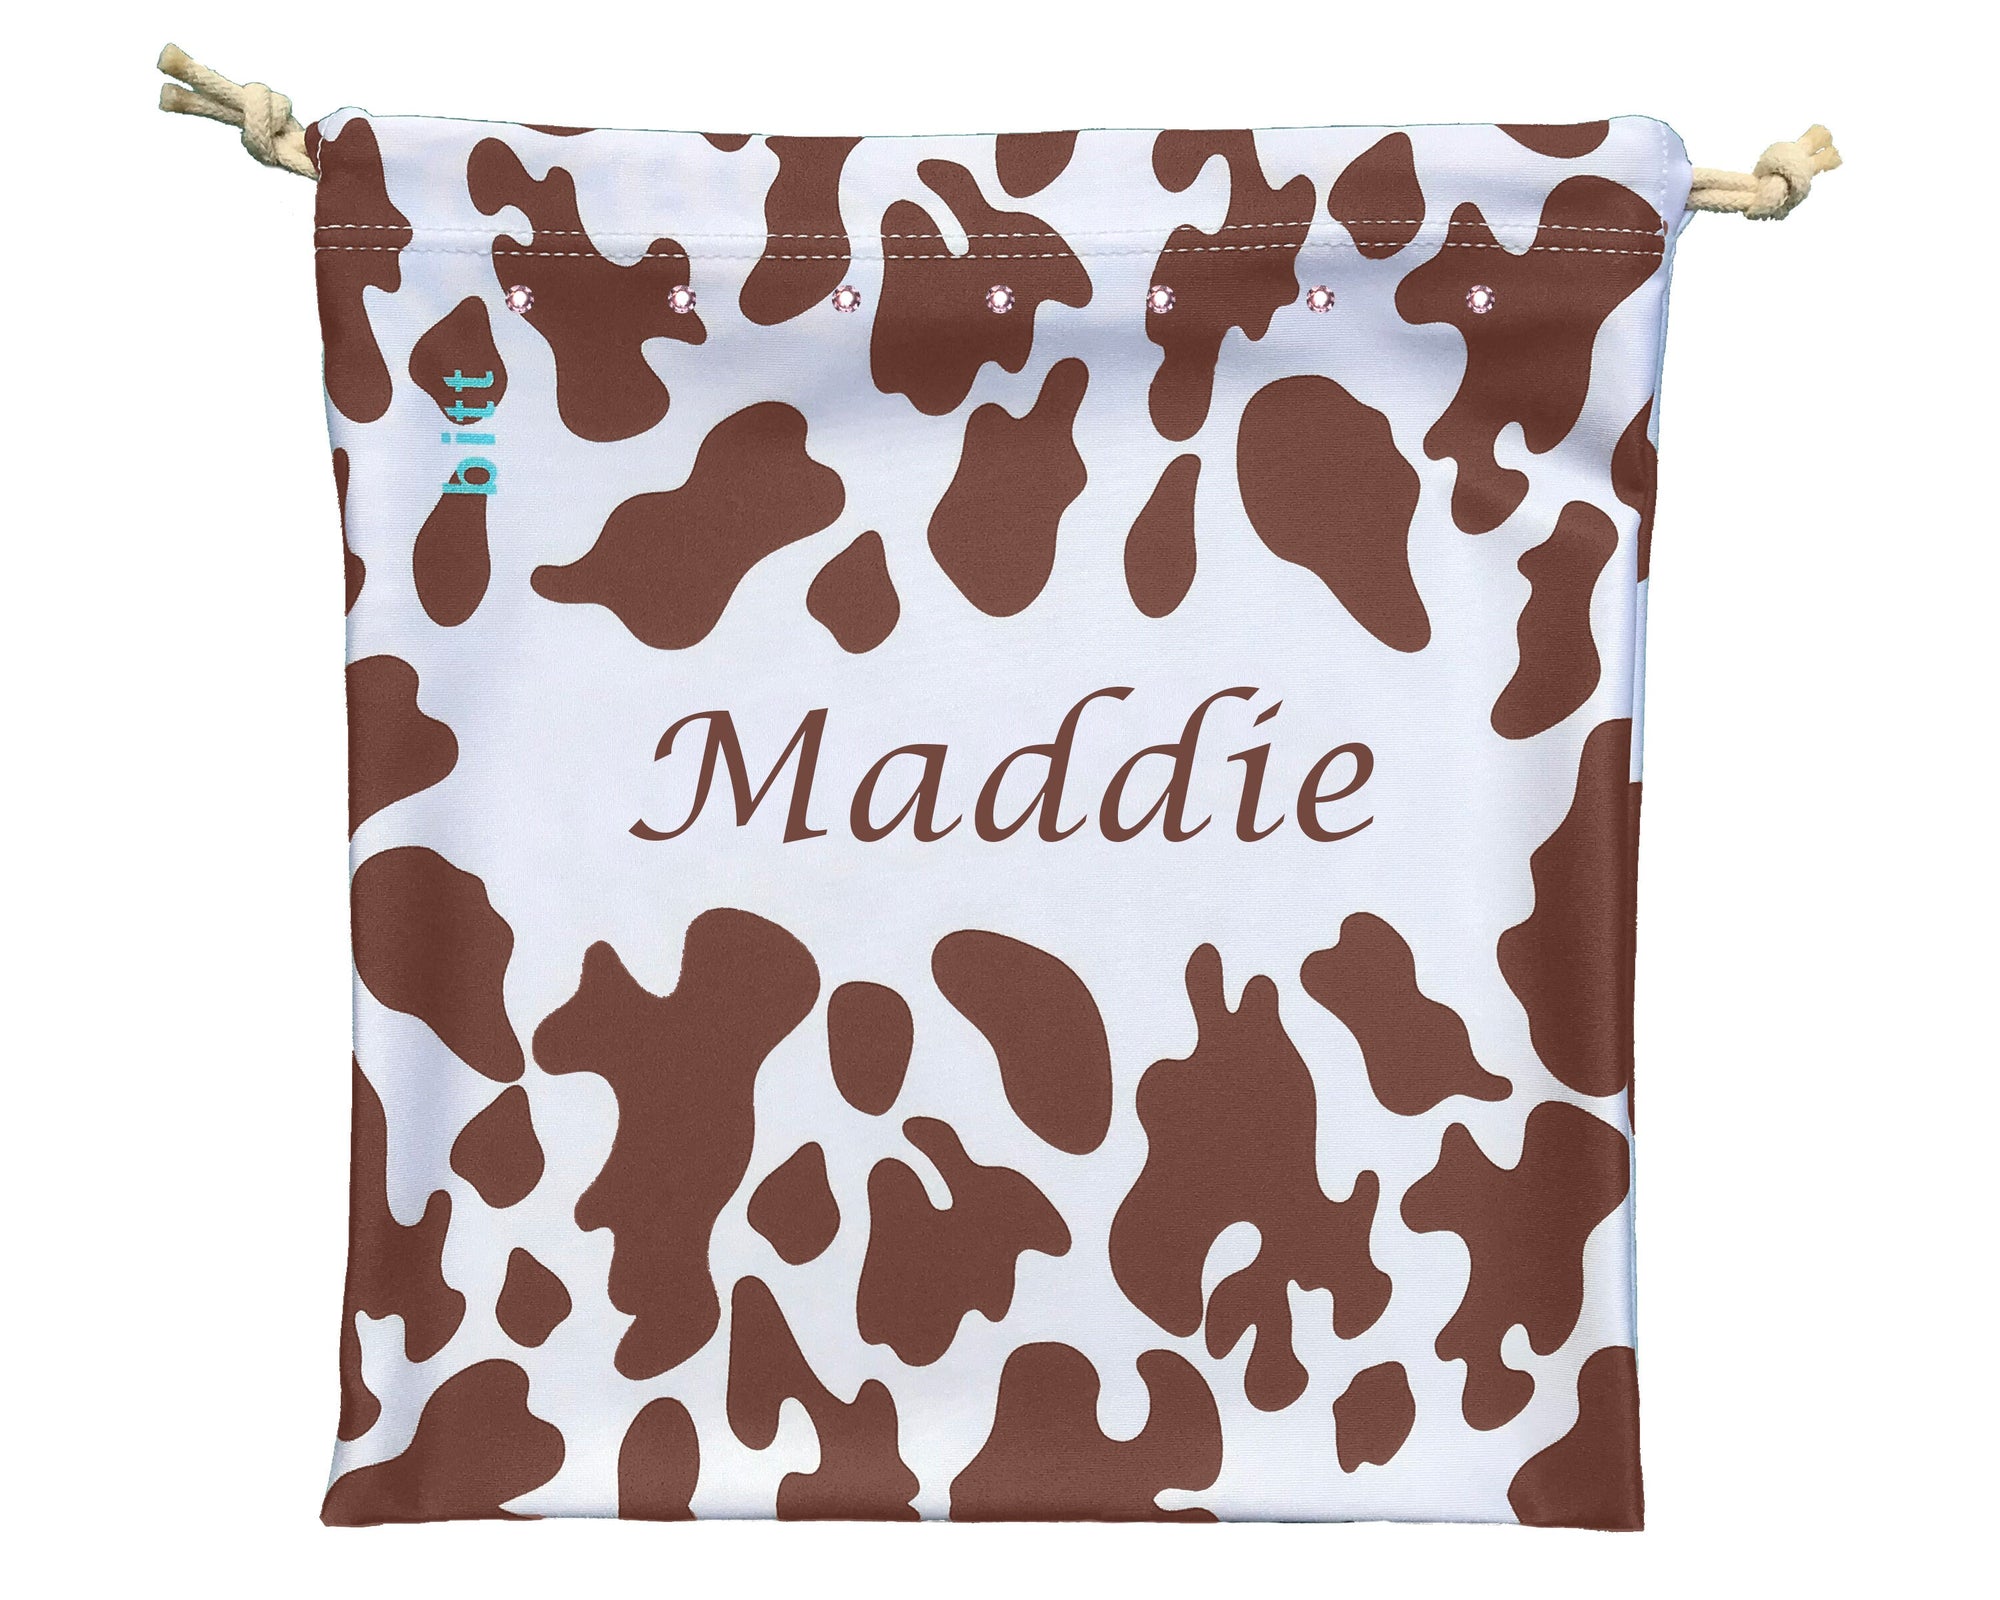 Personalized Gymnastics Grip Bag in Brown & White Cow Print